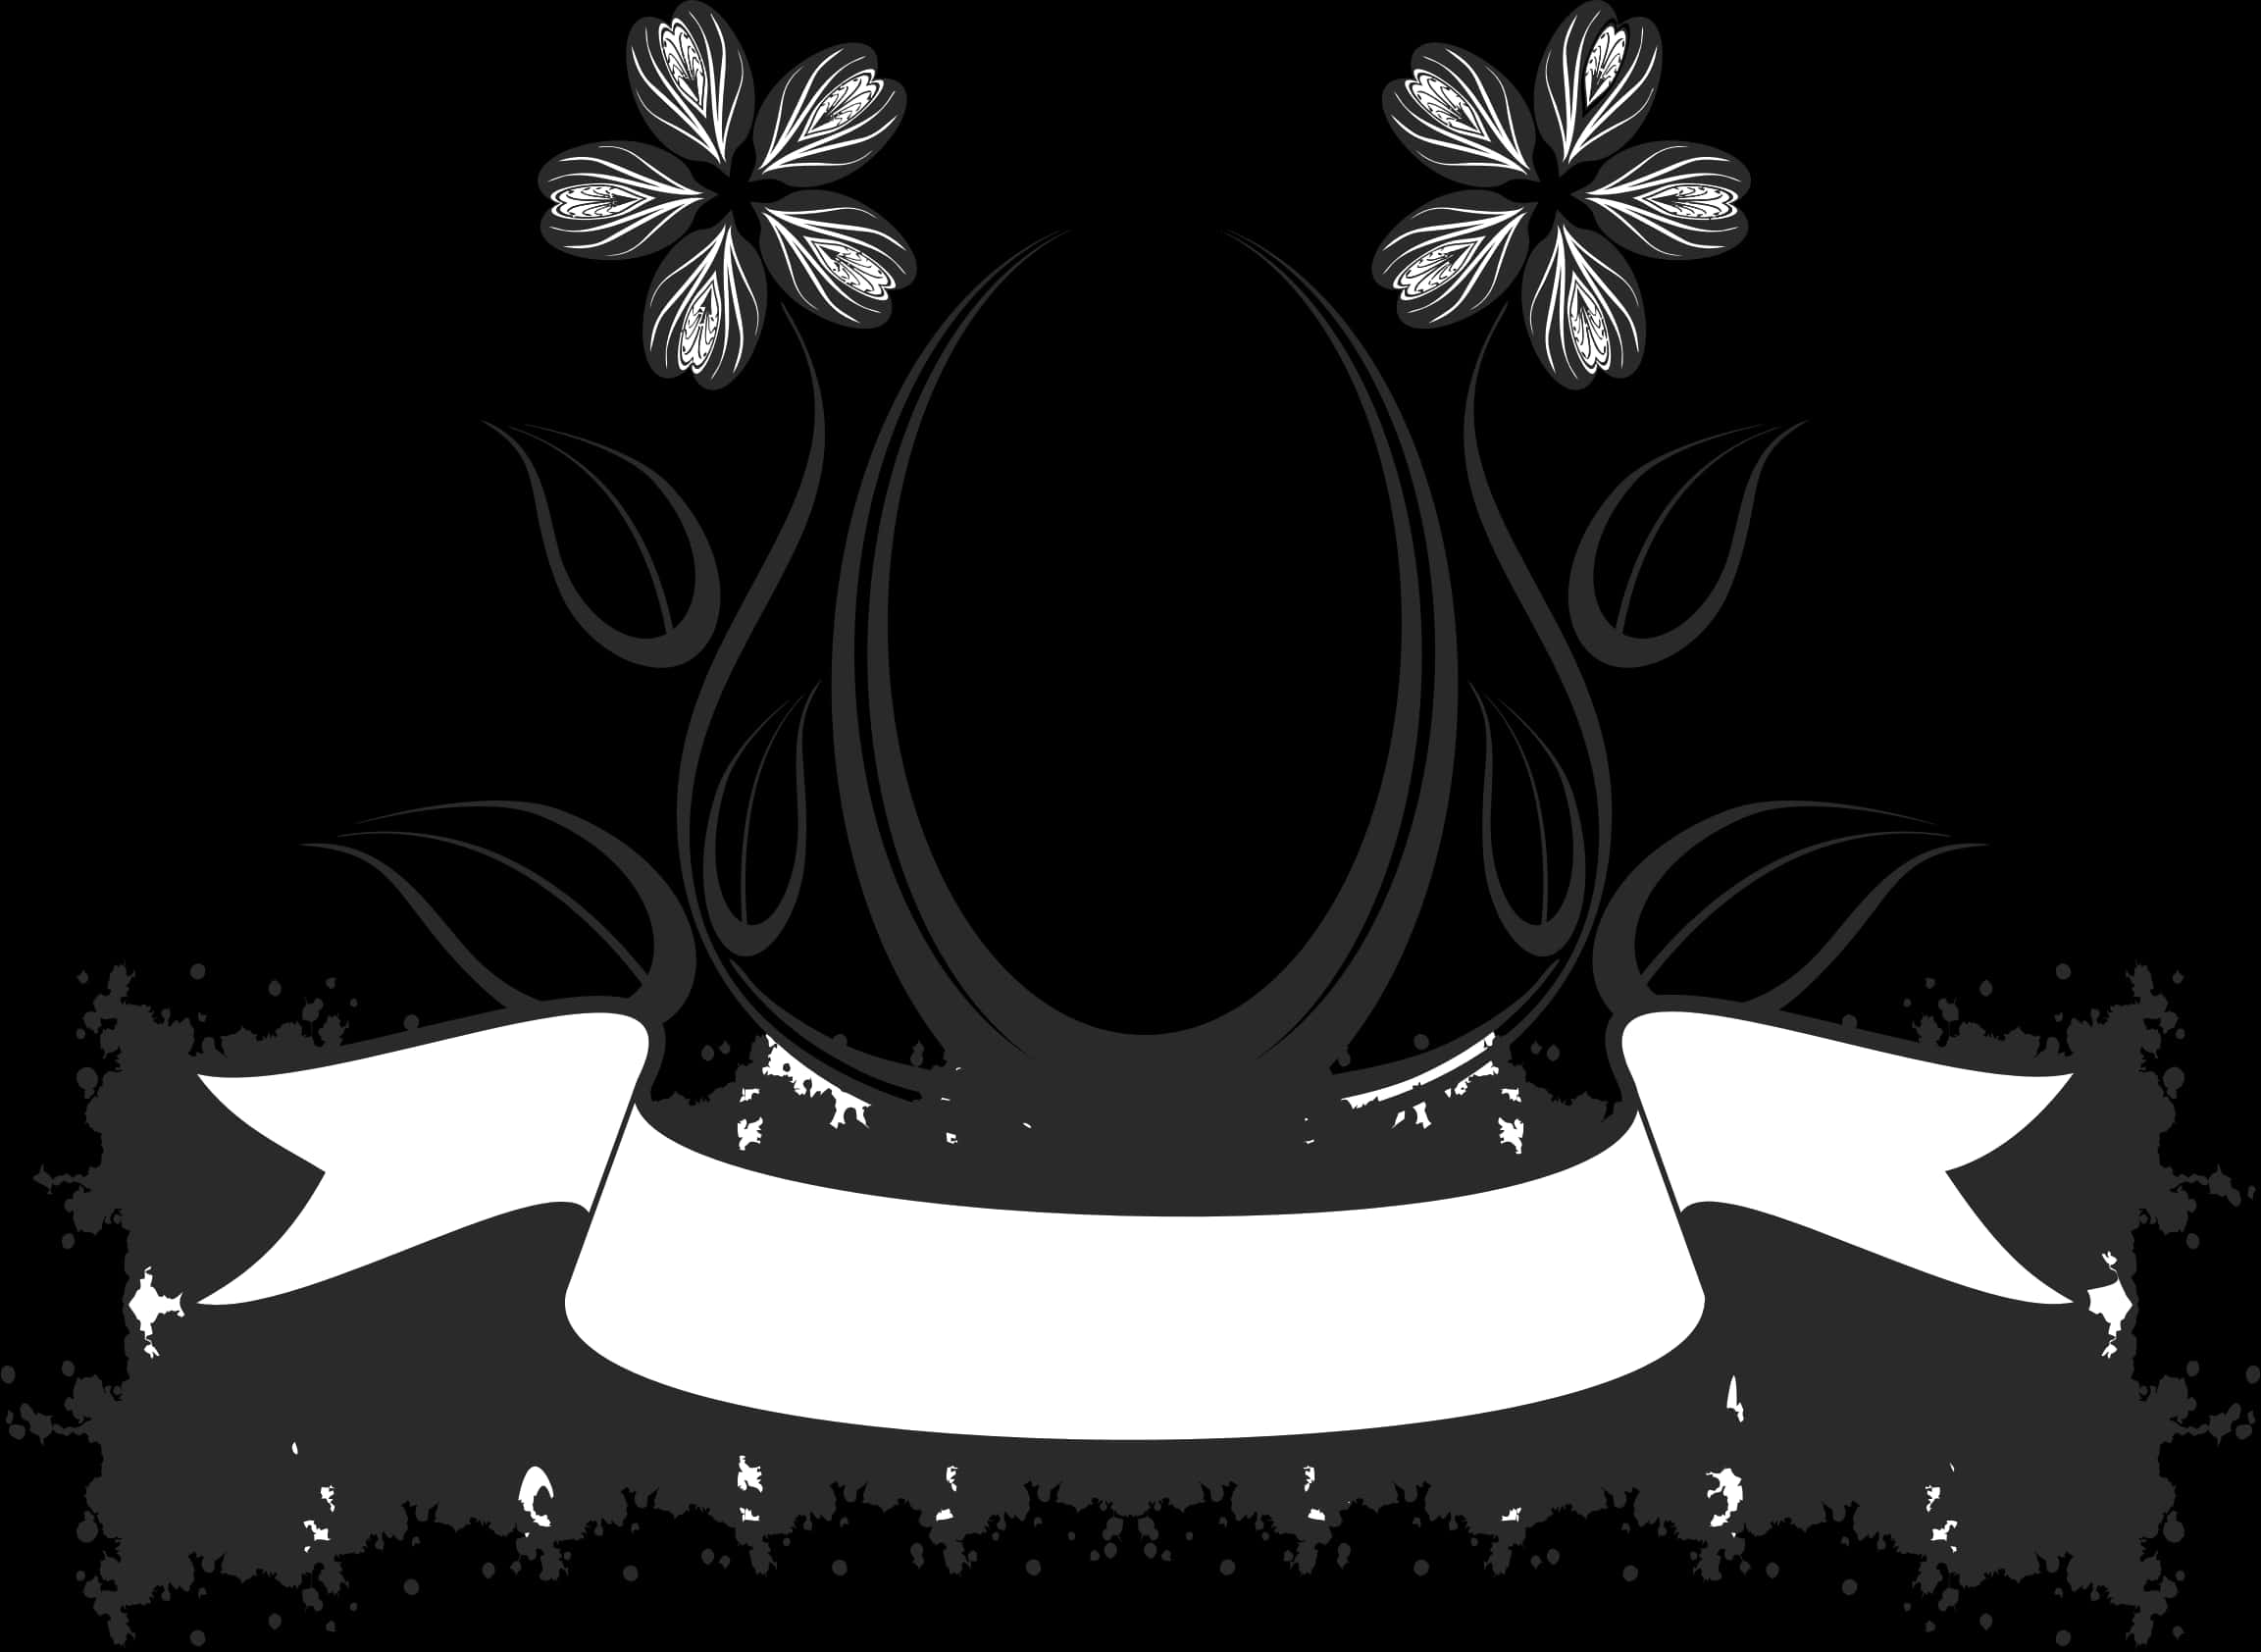 Abstract Black Floral Crown Design PNG image